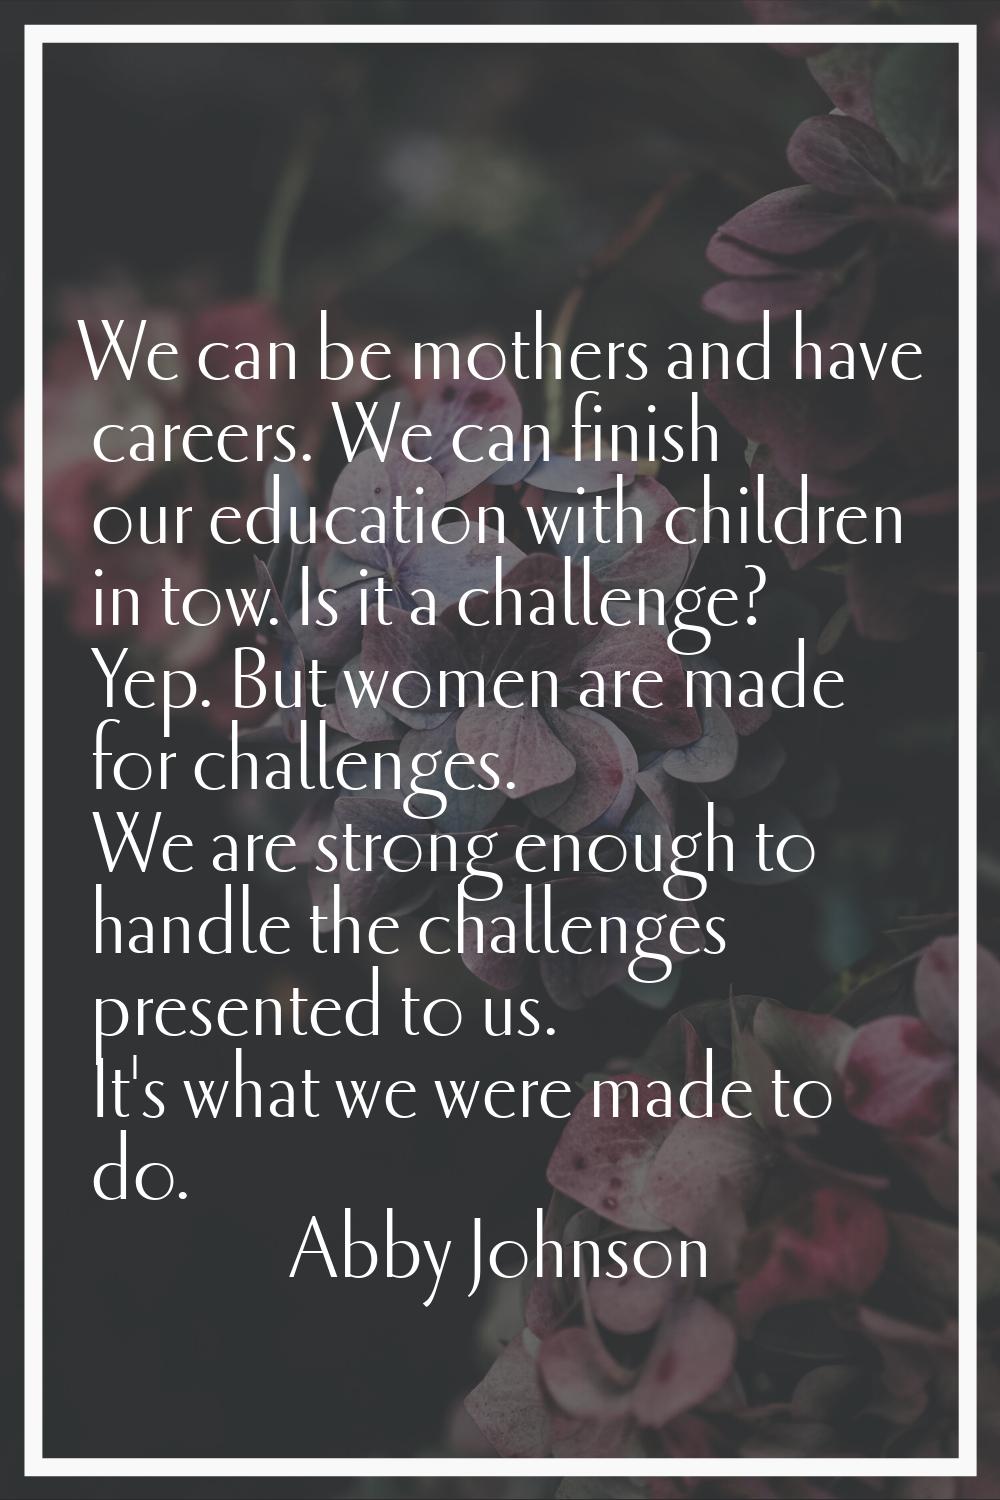 We can be mothers and have careers. We can finish our education with children in tow. Is it a chall